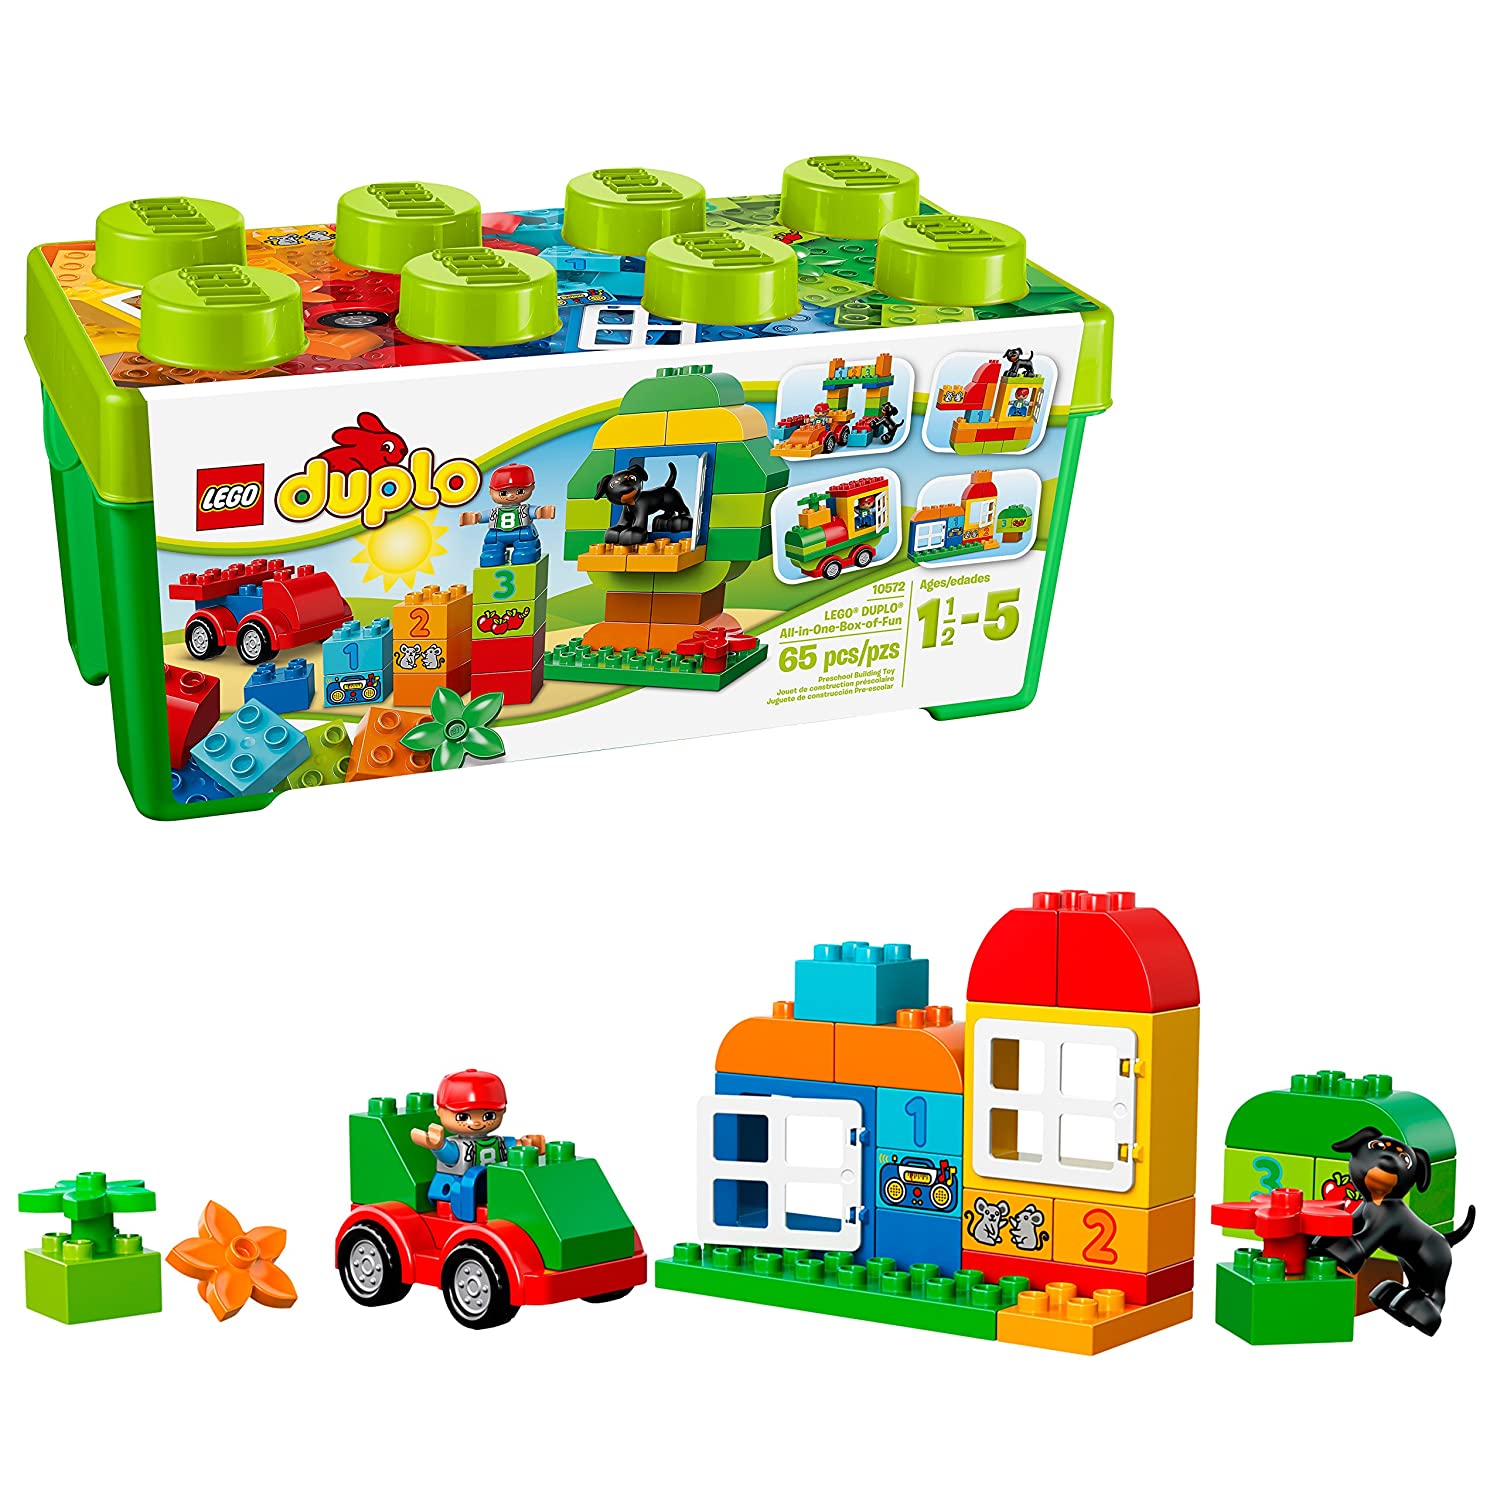 Top 9 Best Lego Duplo Sets Reviews in 2023 3